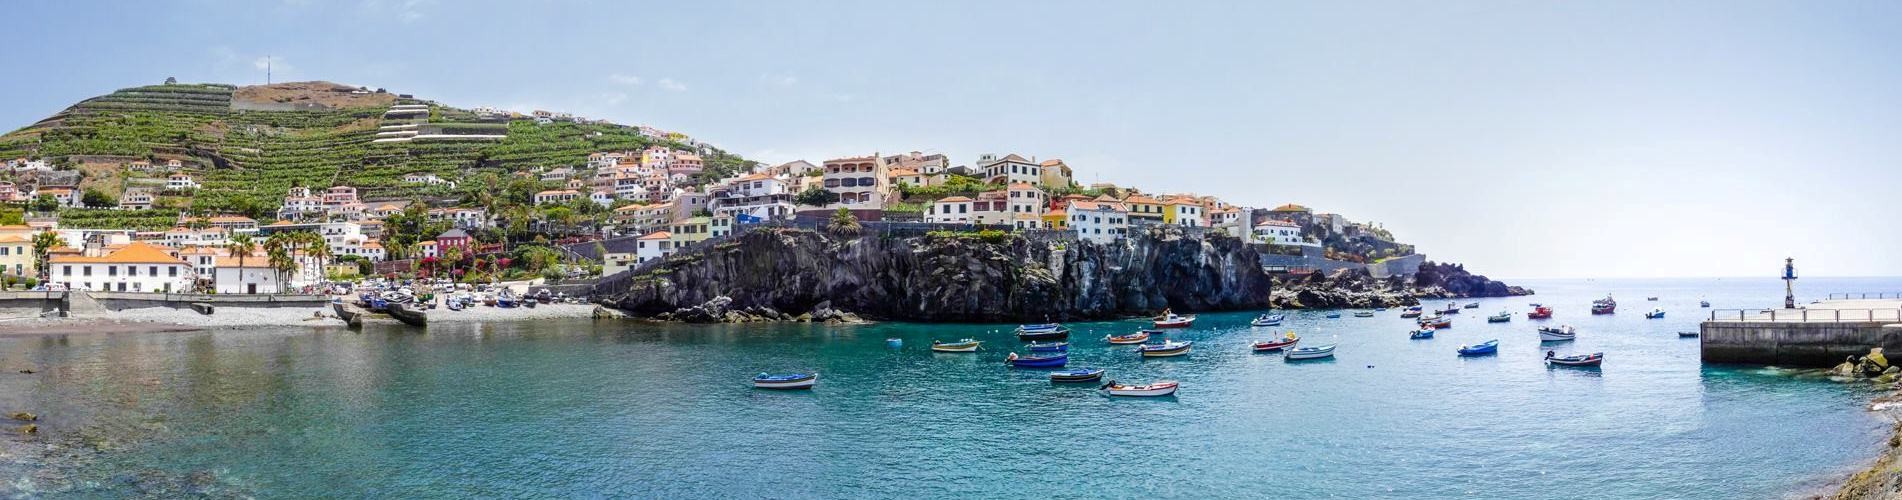 Excursions in Madeira Island